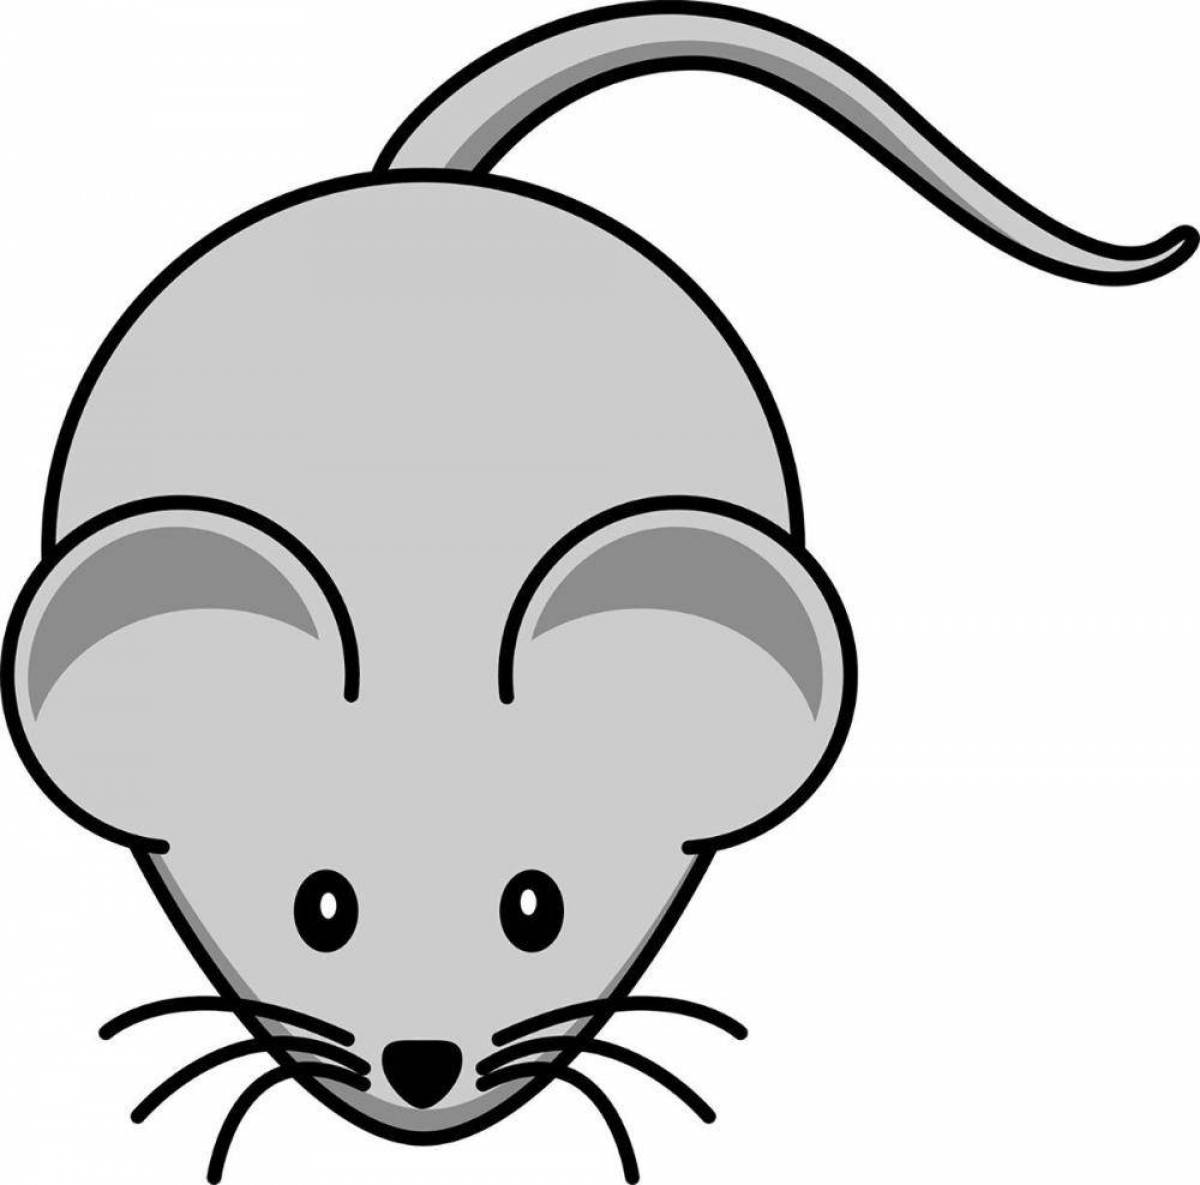 Cute mouse drawing